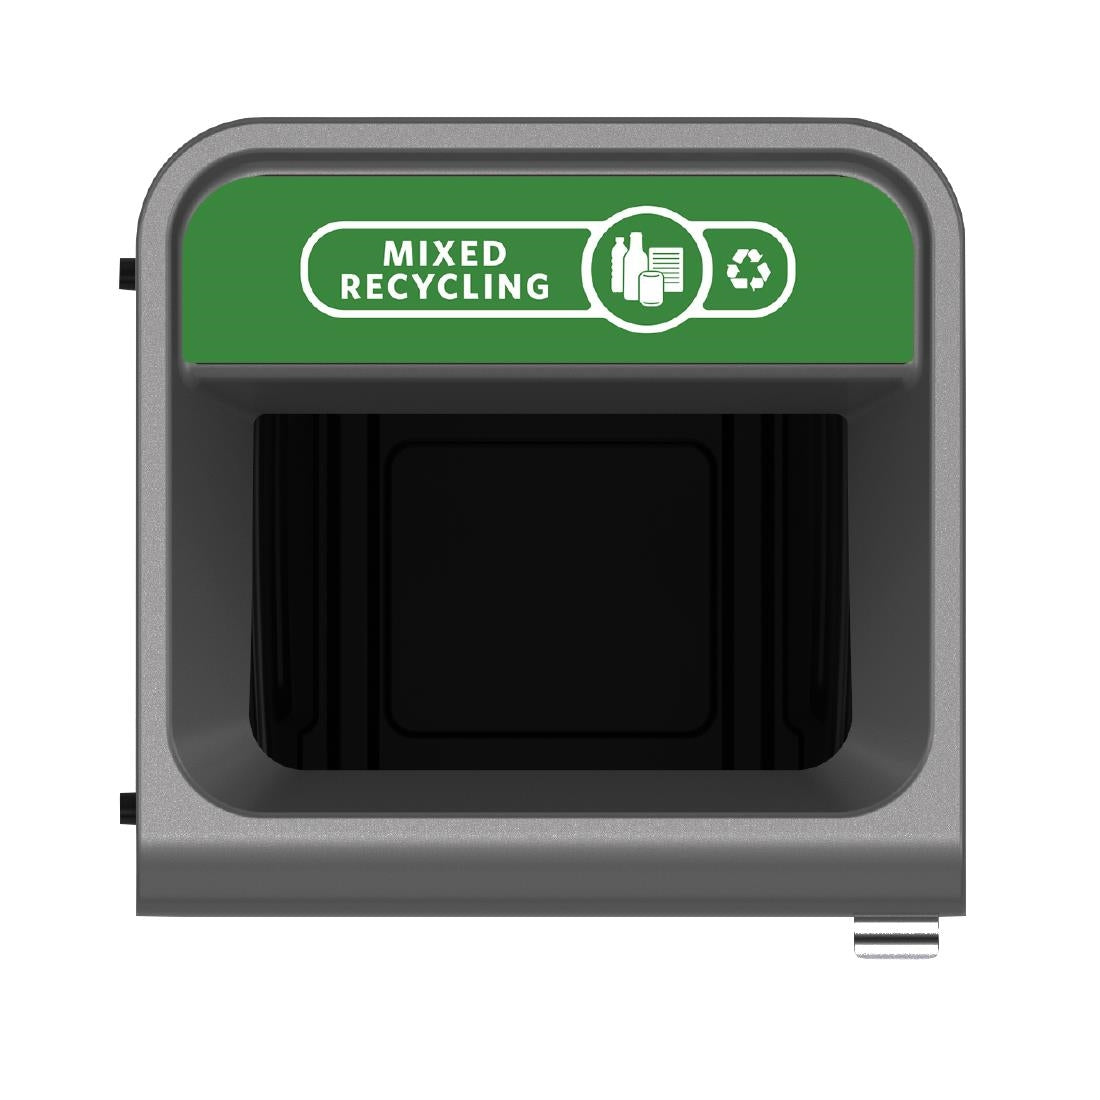 CX961 Rubbermaid Configure Recycling Bin with Mixed Recycling Label Green 87Ltr JD Catering Equipment Solutions Ltd